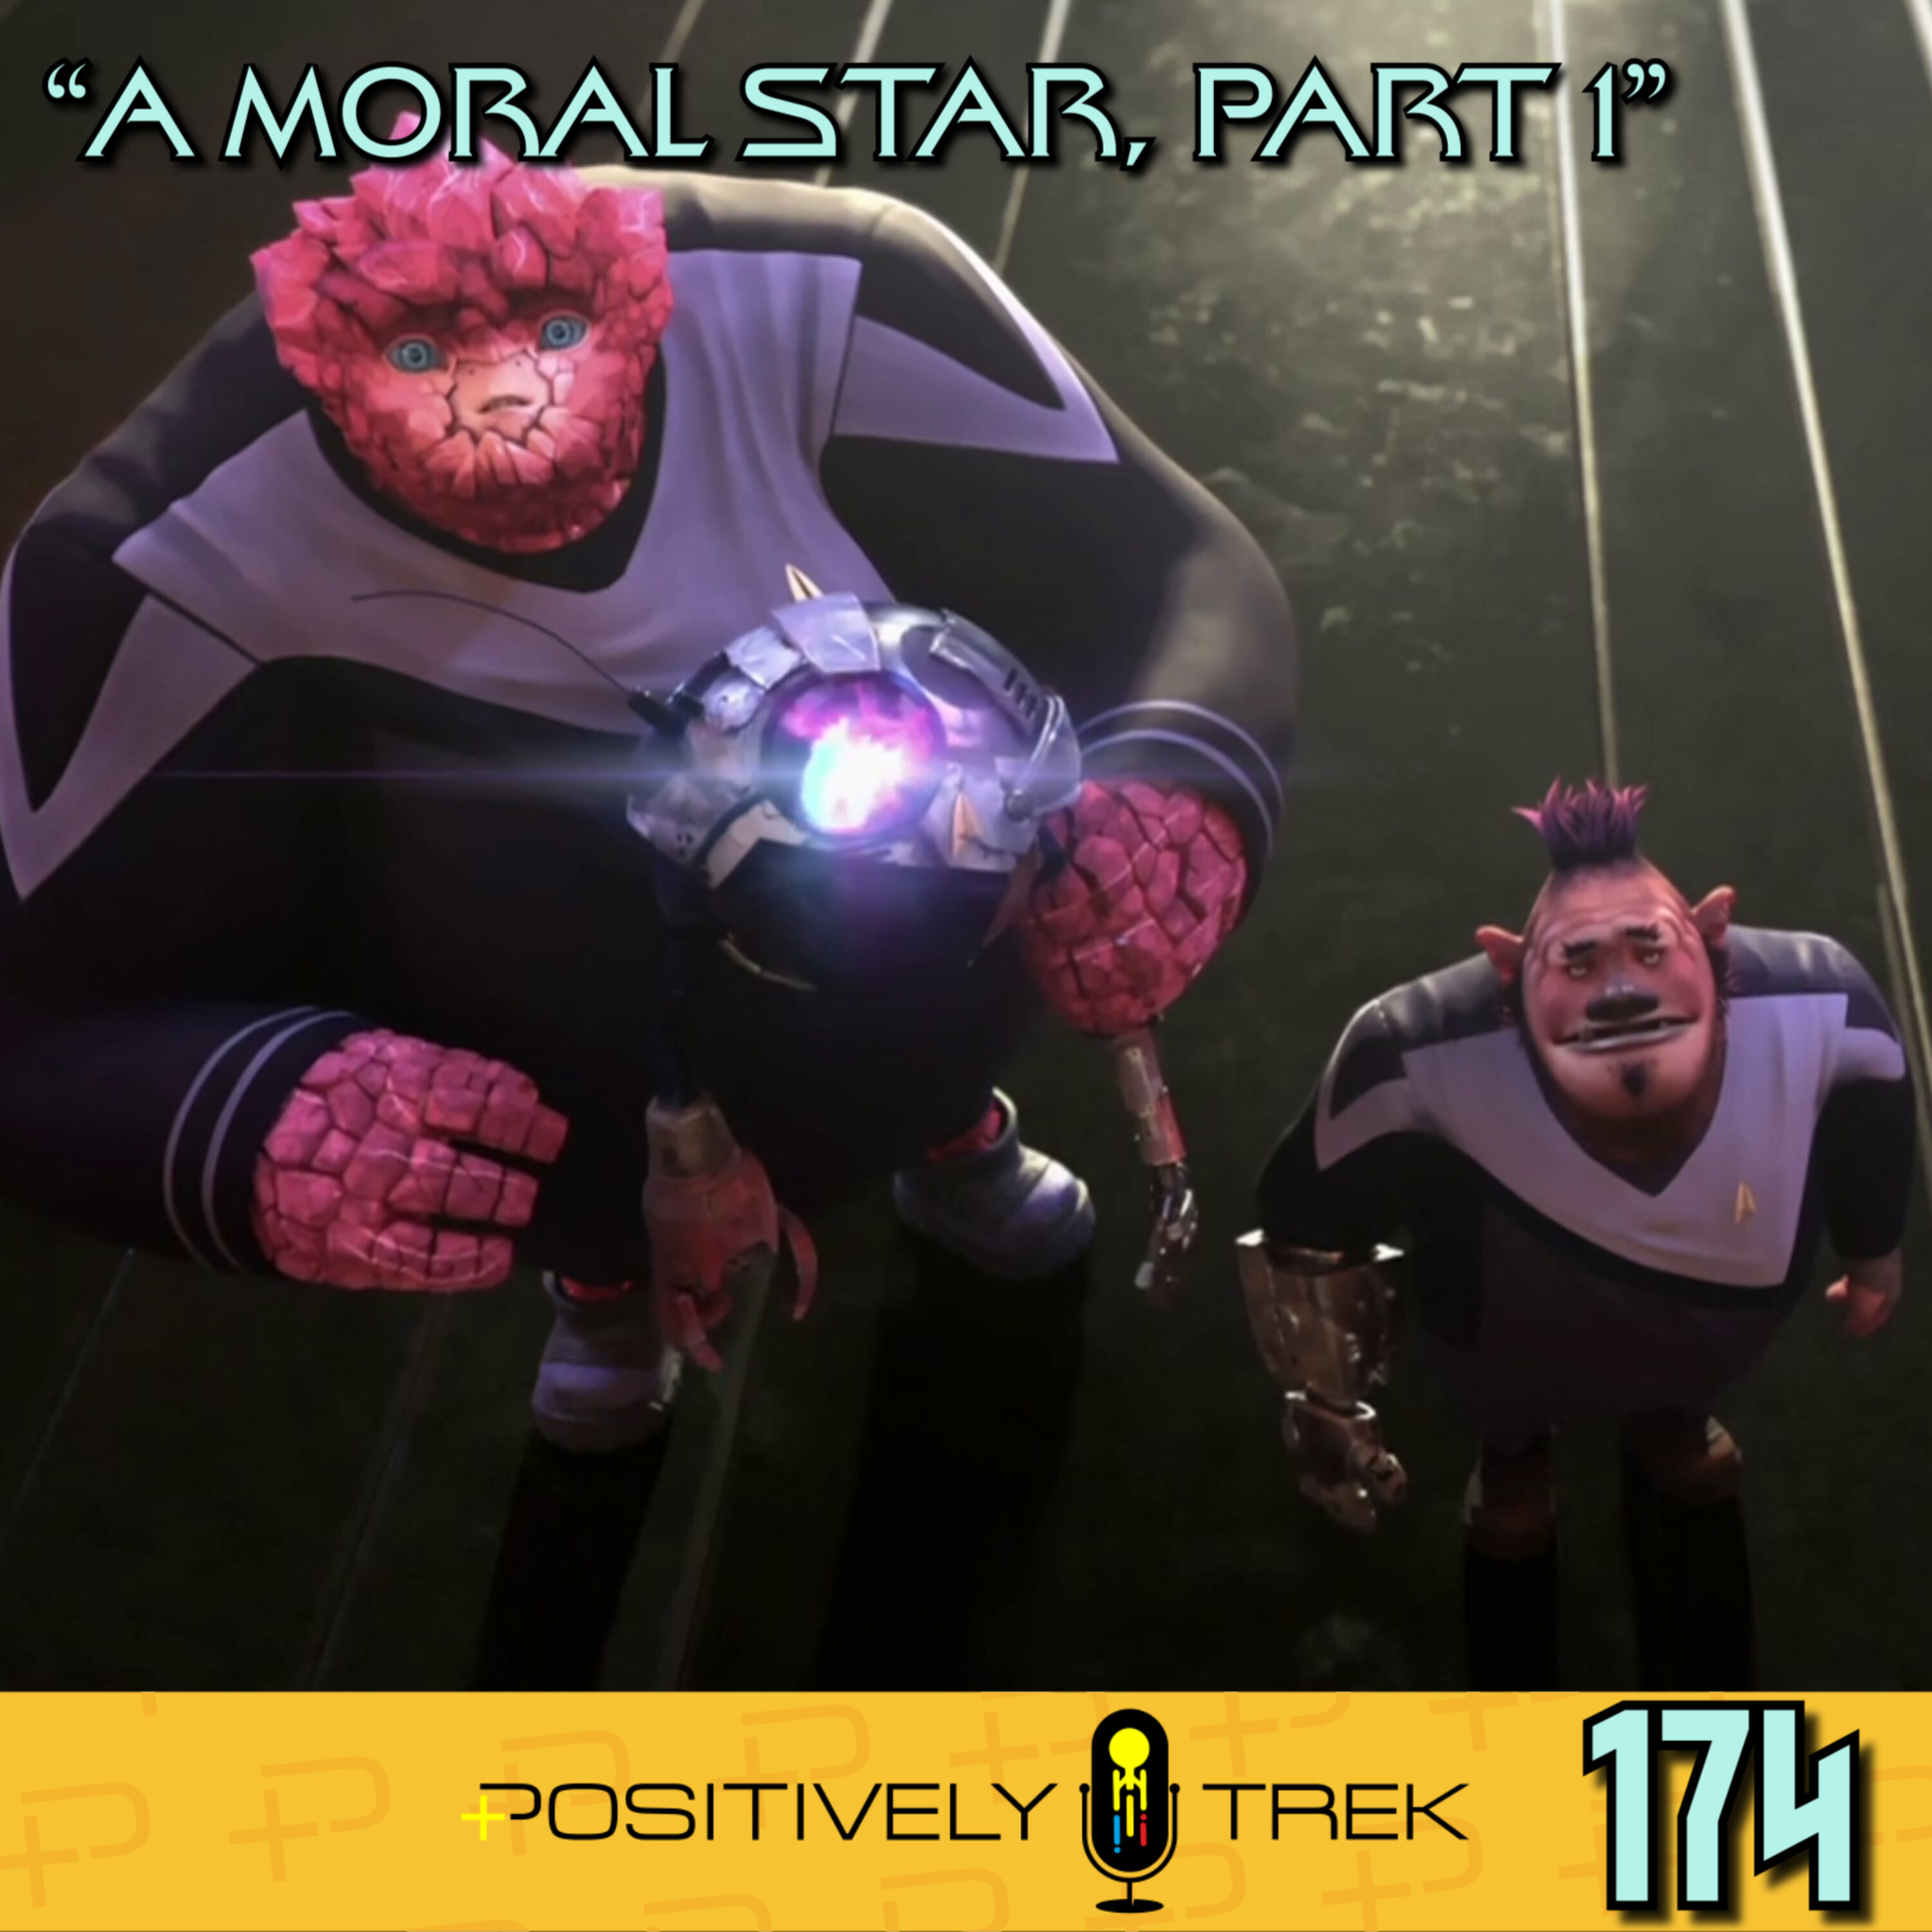 Prodigy Review: “A Moral Star, Part 1” (1.09)